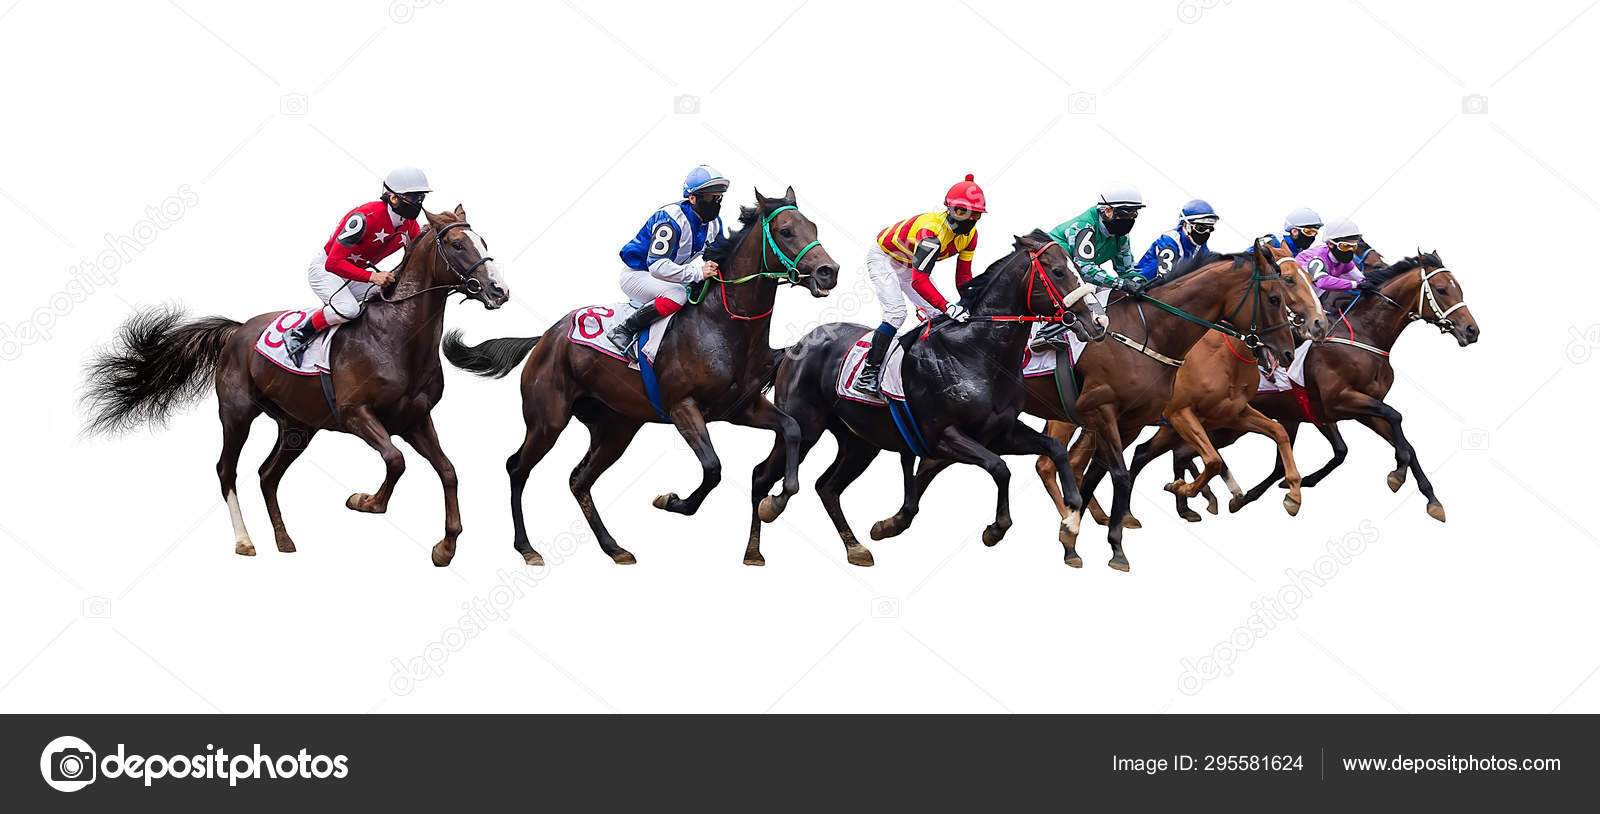 Horse Racing Images | Free Photos, PNG Stickers, Wallpapers & Backgrounds -  rawpixel